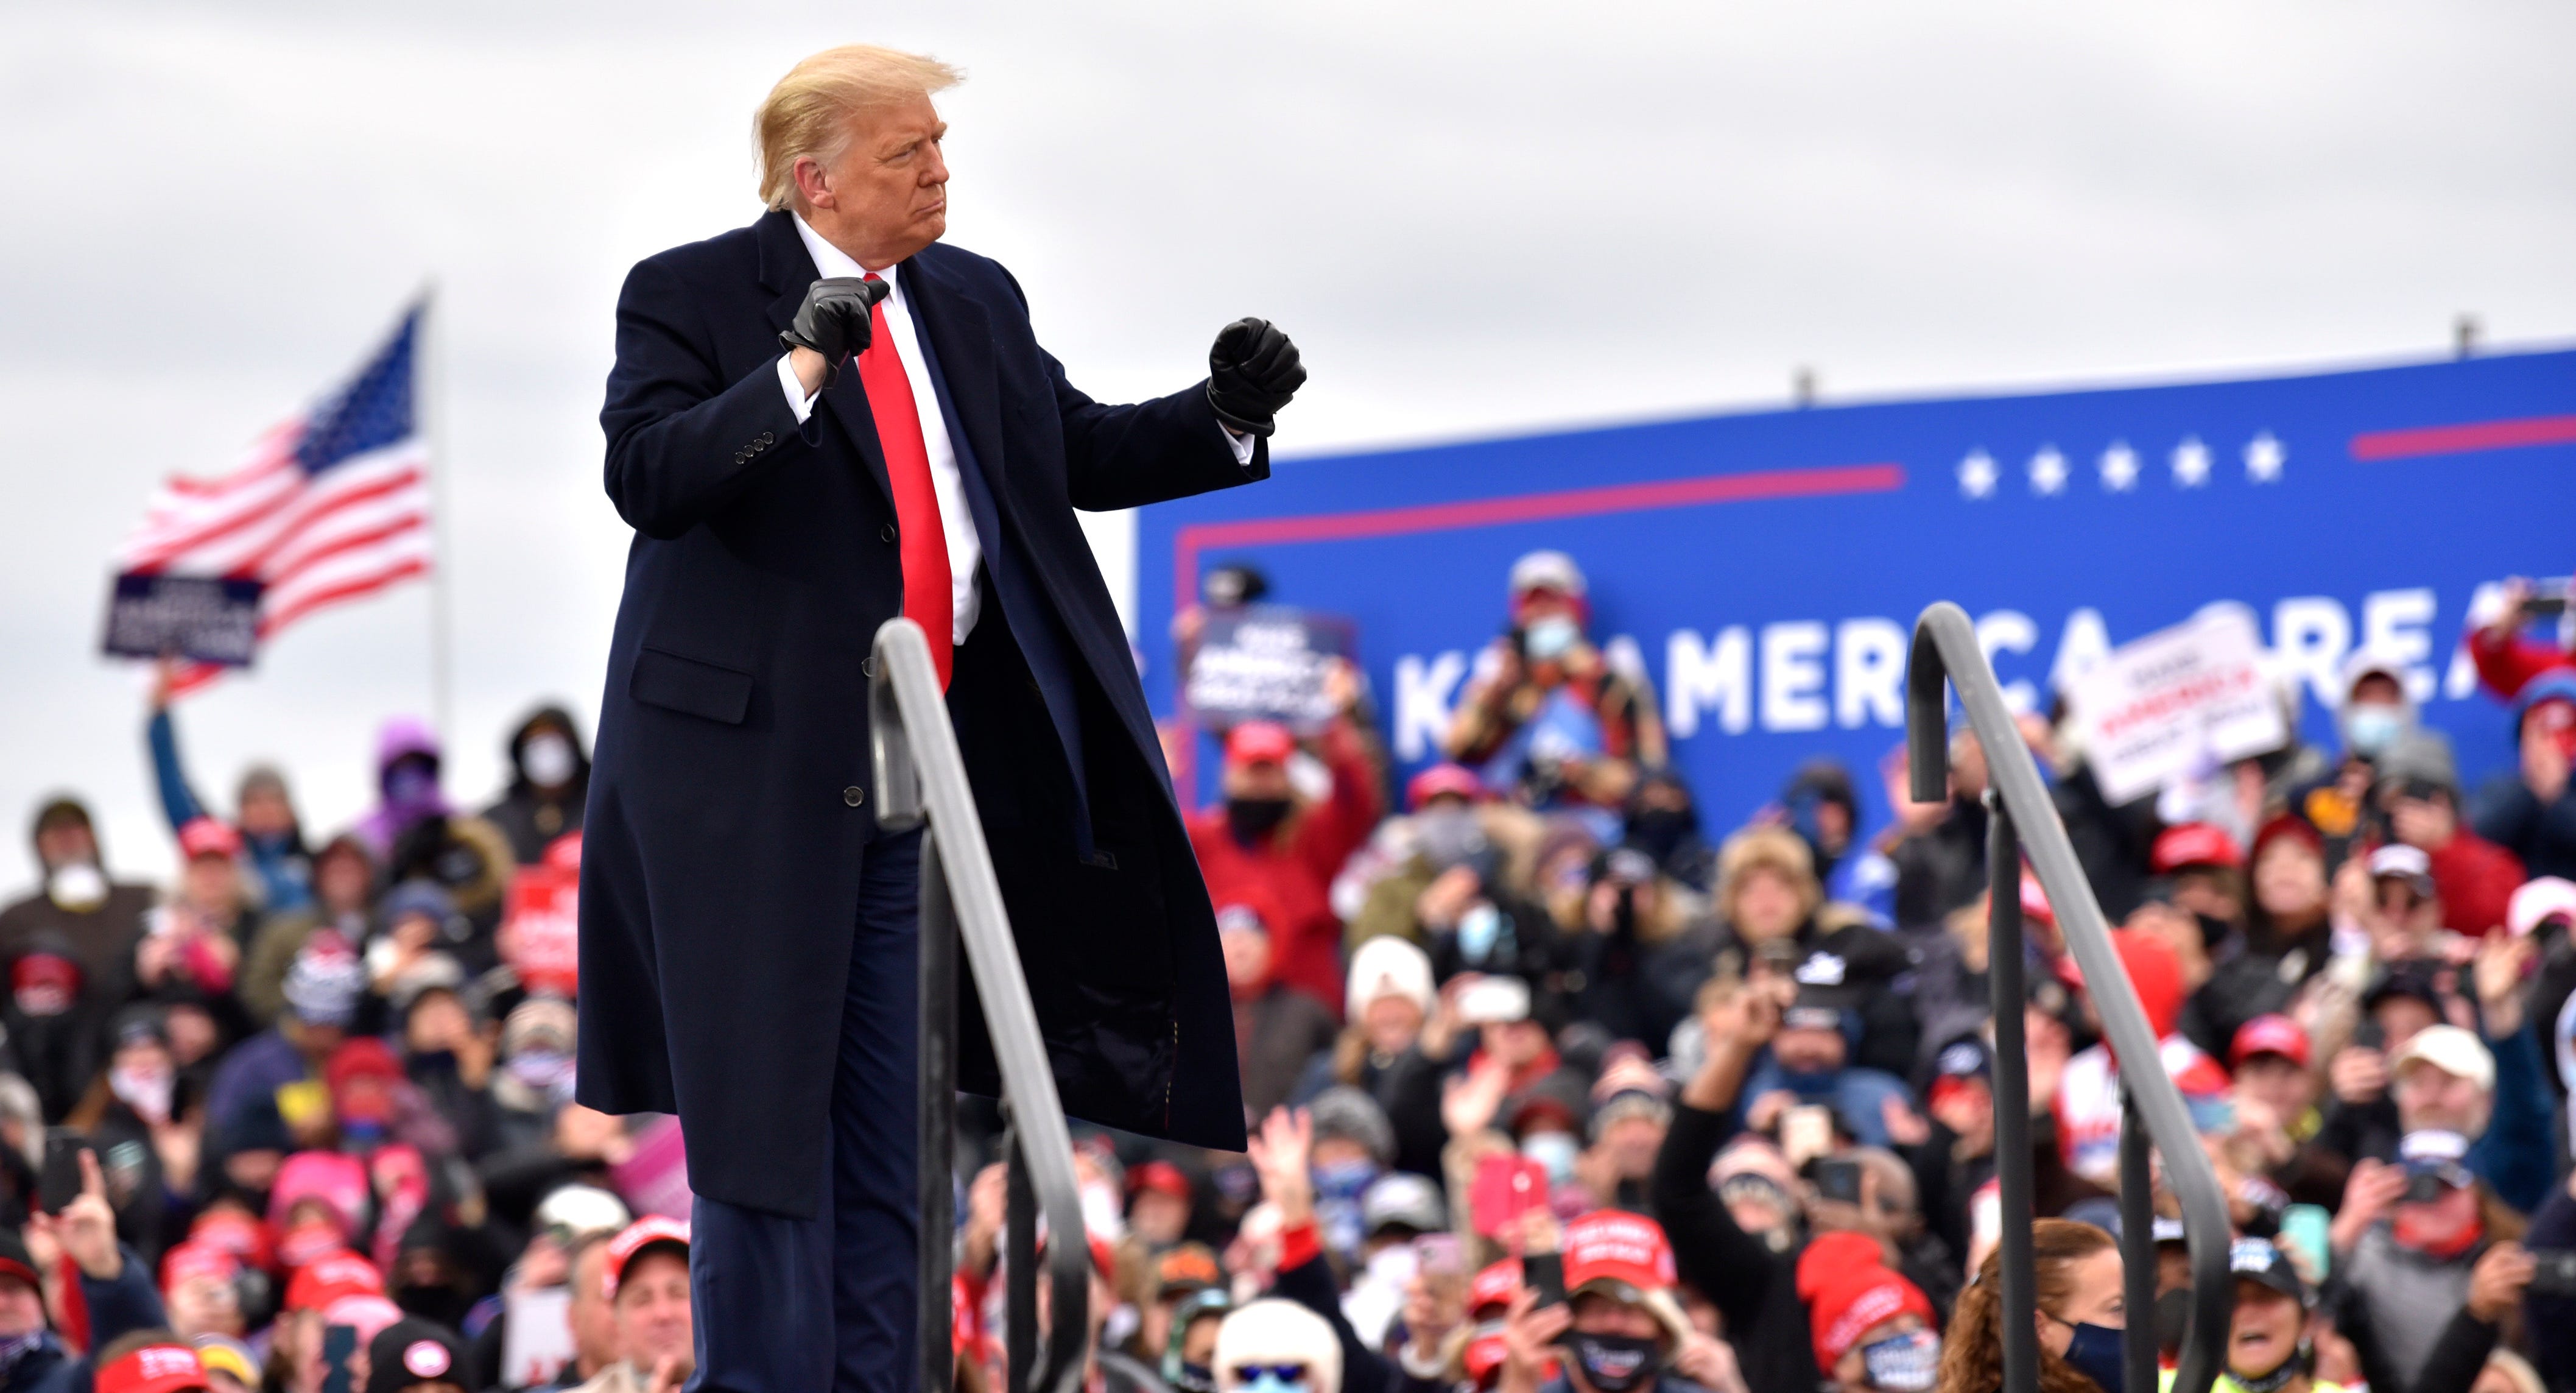 President Trump pumps his fist after he speaks at the Oakland International Airport in Waterford Twp., Friday, October 30, 2020, for his Make America Great Again Victory Rally.